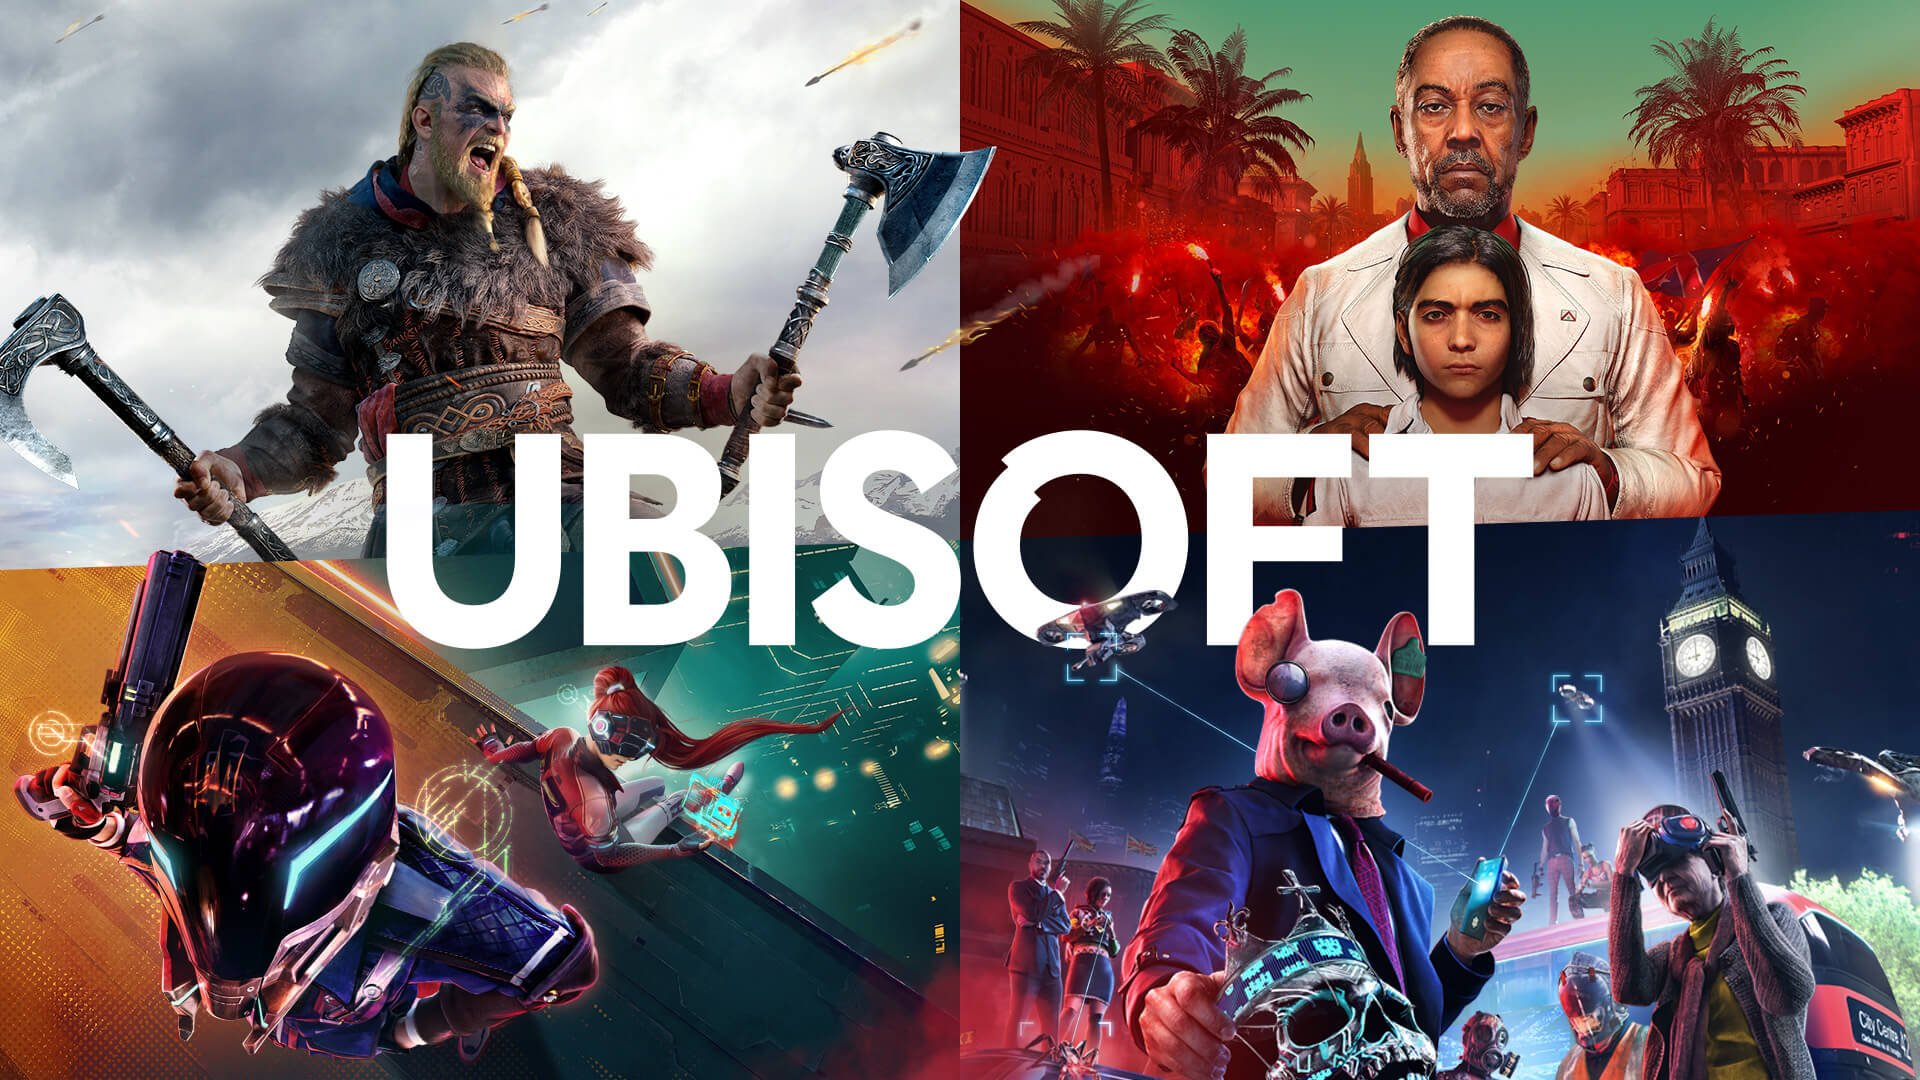 Four games being developed by Ubisoft, another company being accused of harassment alongside Activision Blizzard